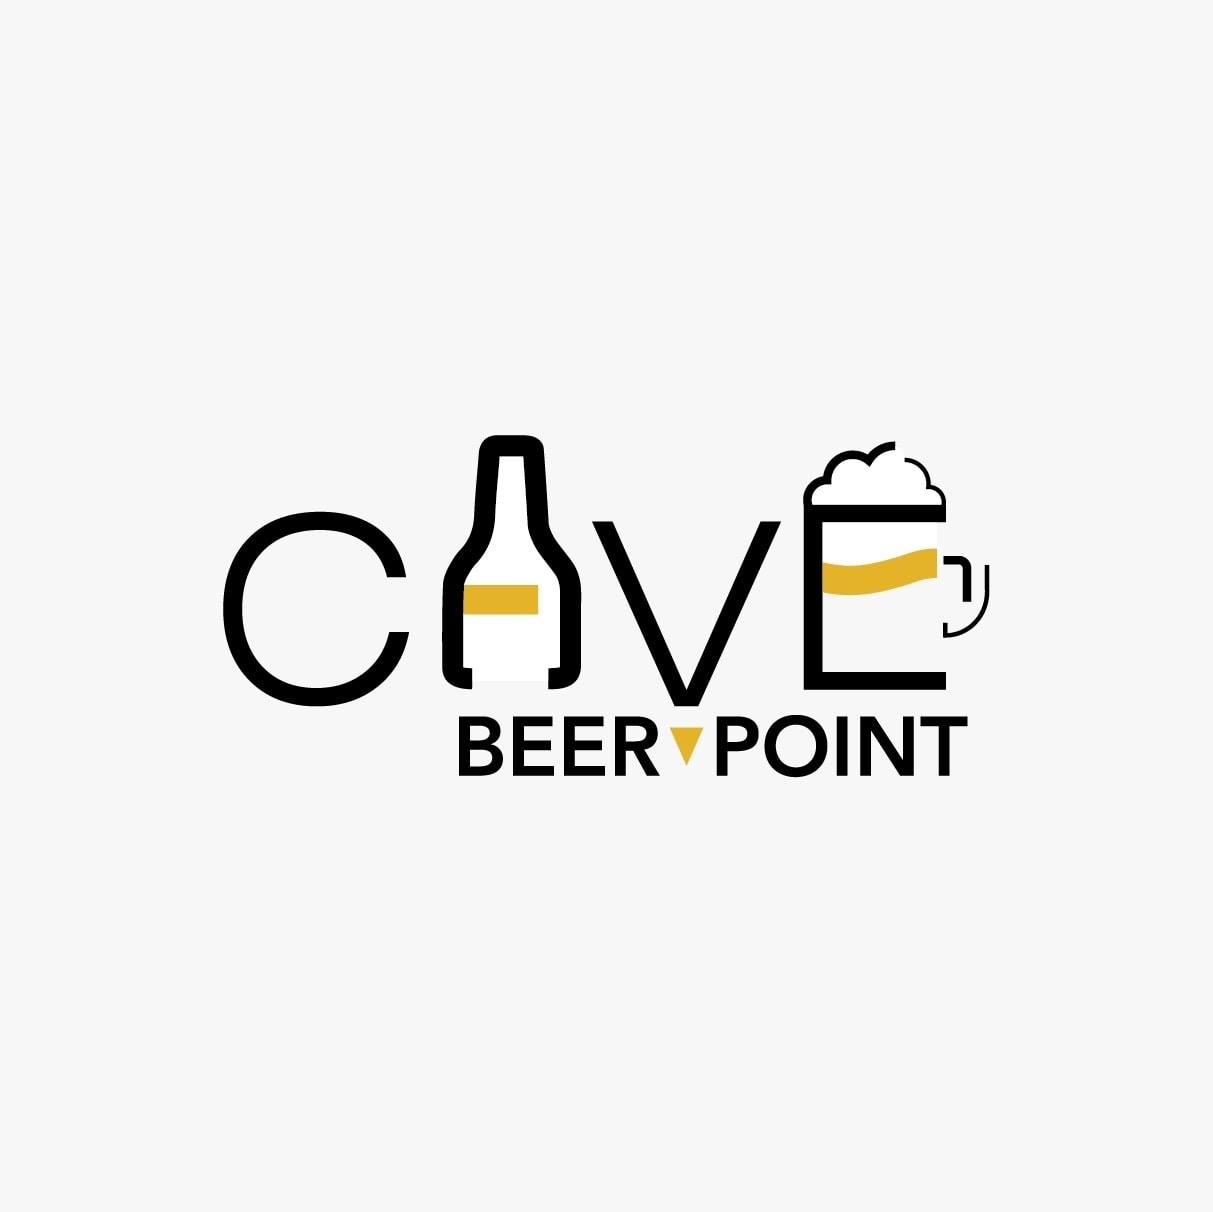 CAVE Beer Point hk